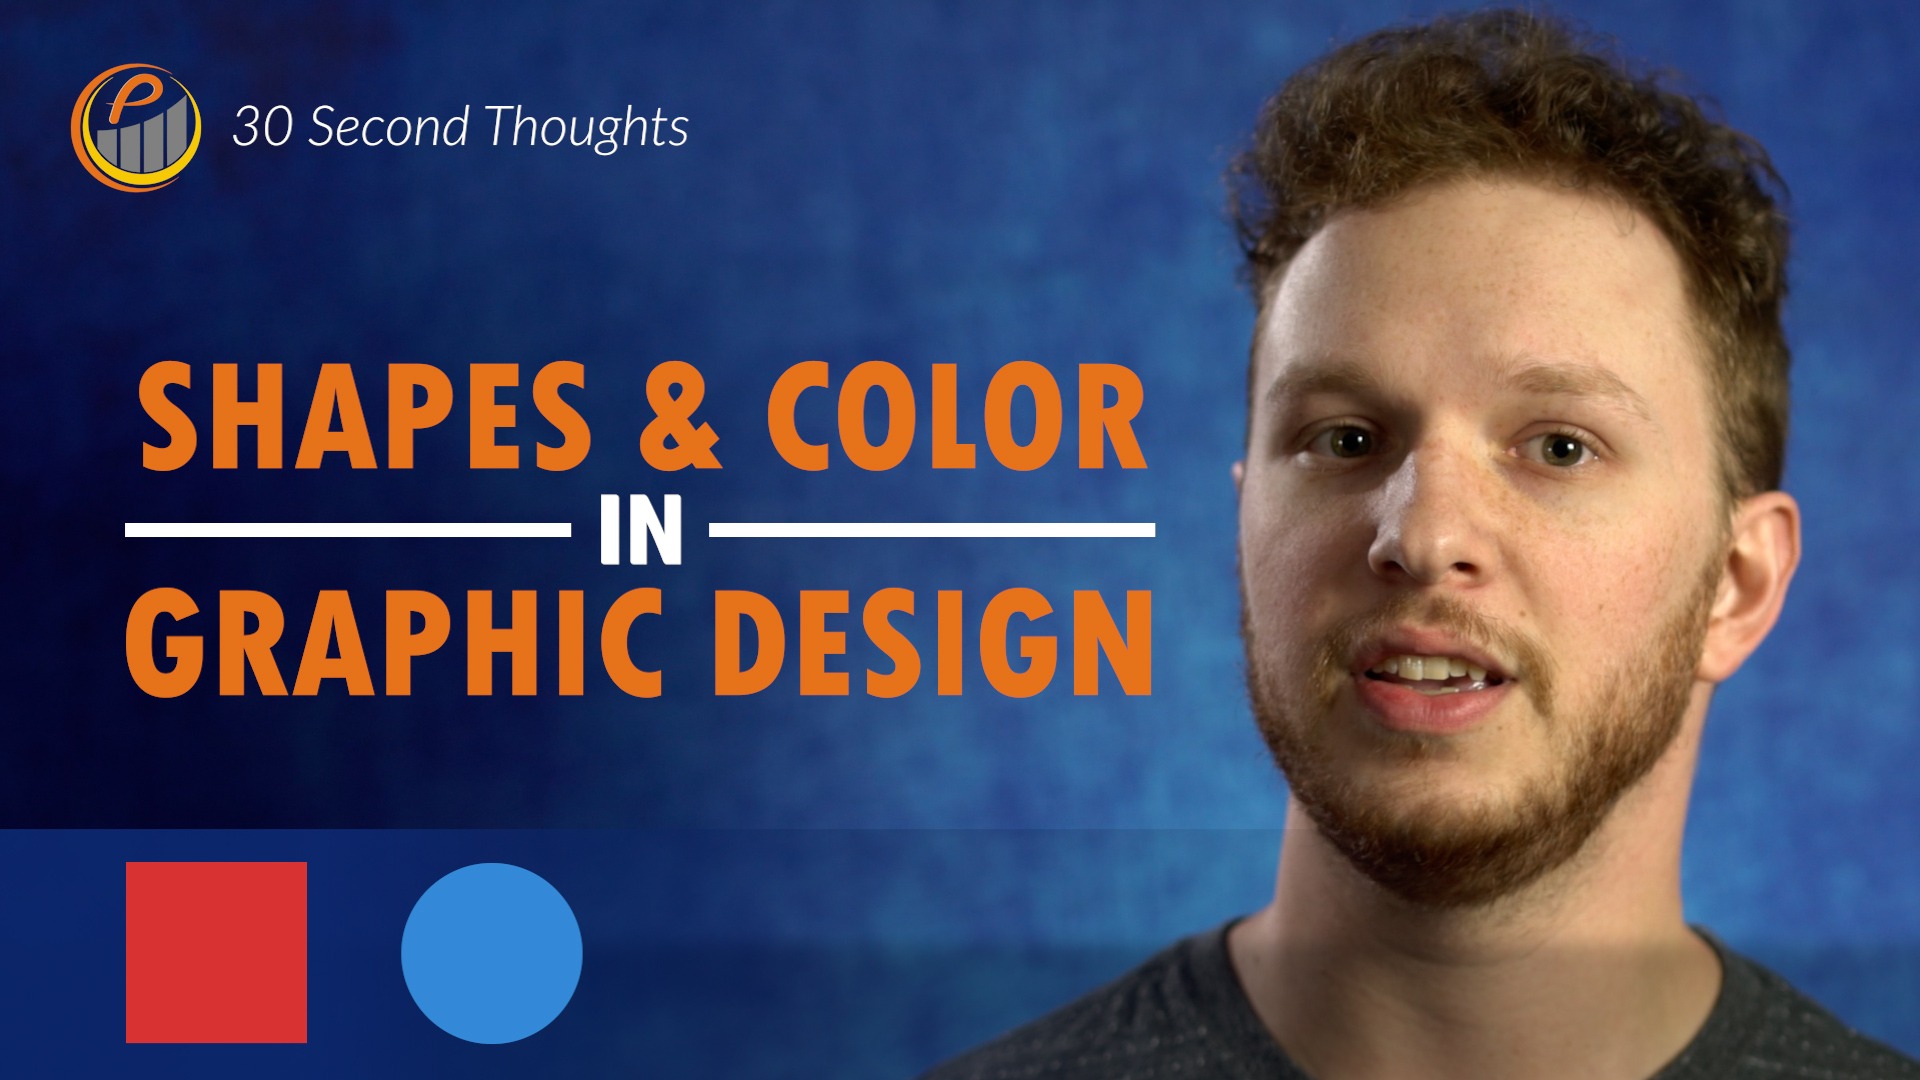 Shapes & Color in Graphic Design